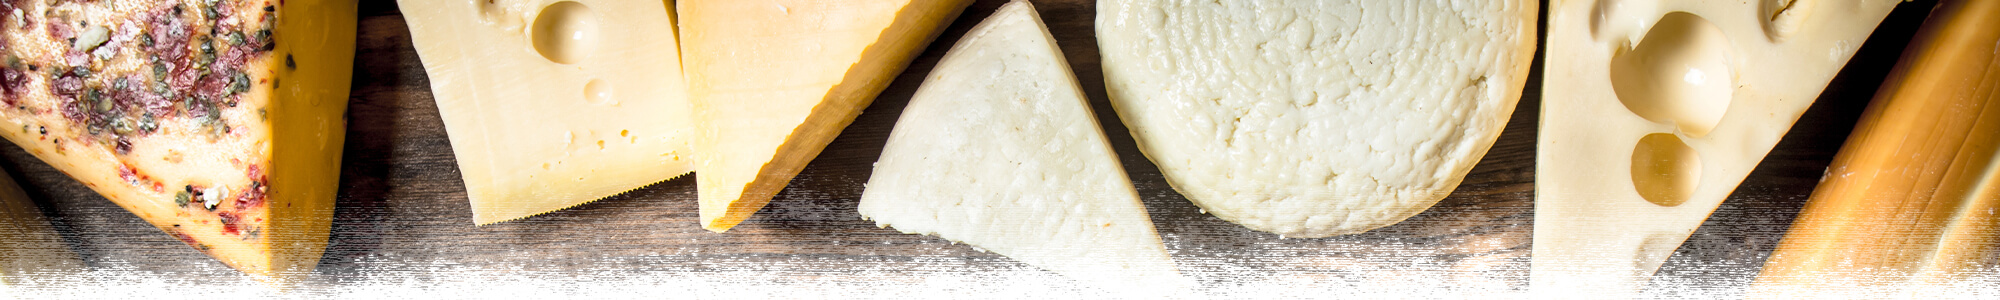 Artisan cheese manufacturers in Wisconsin